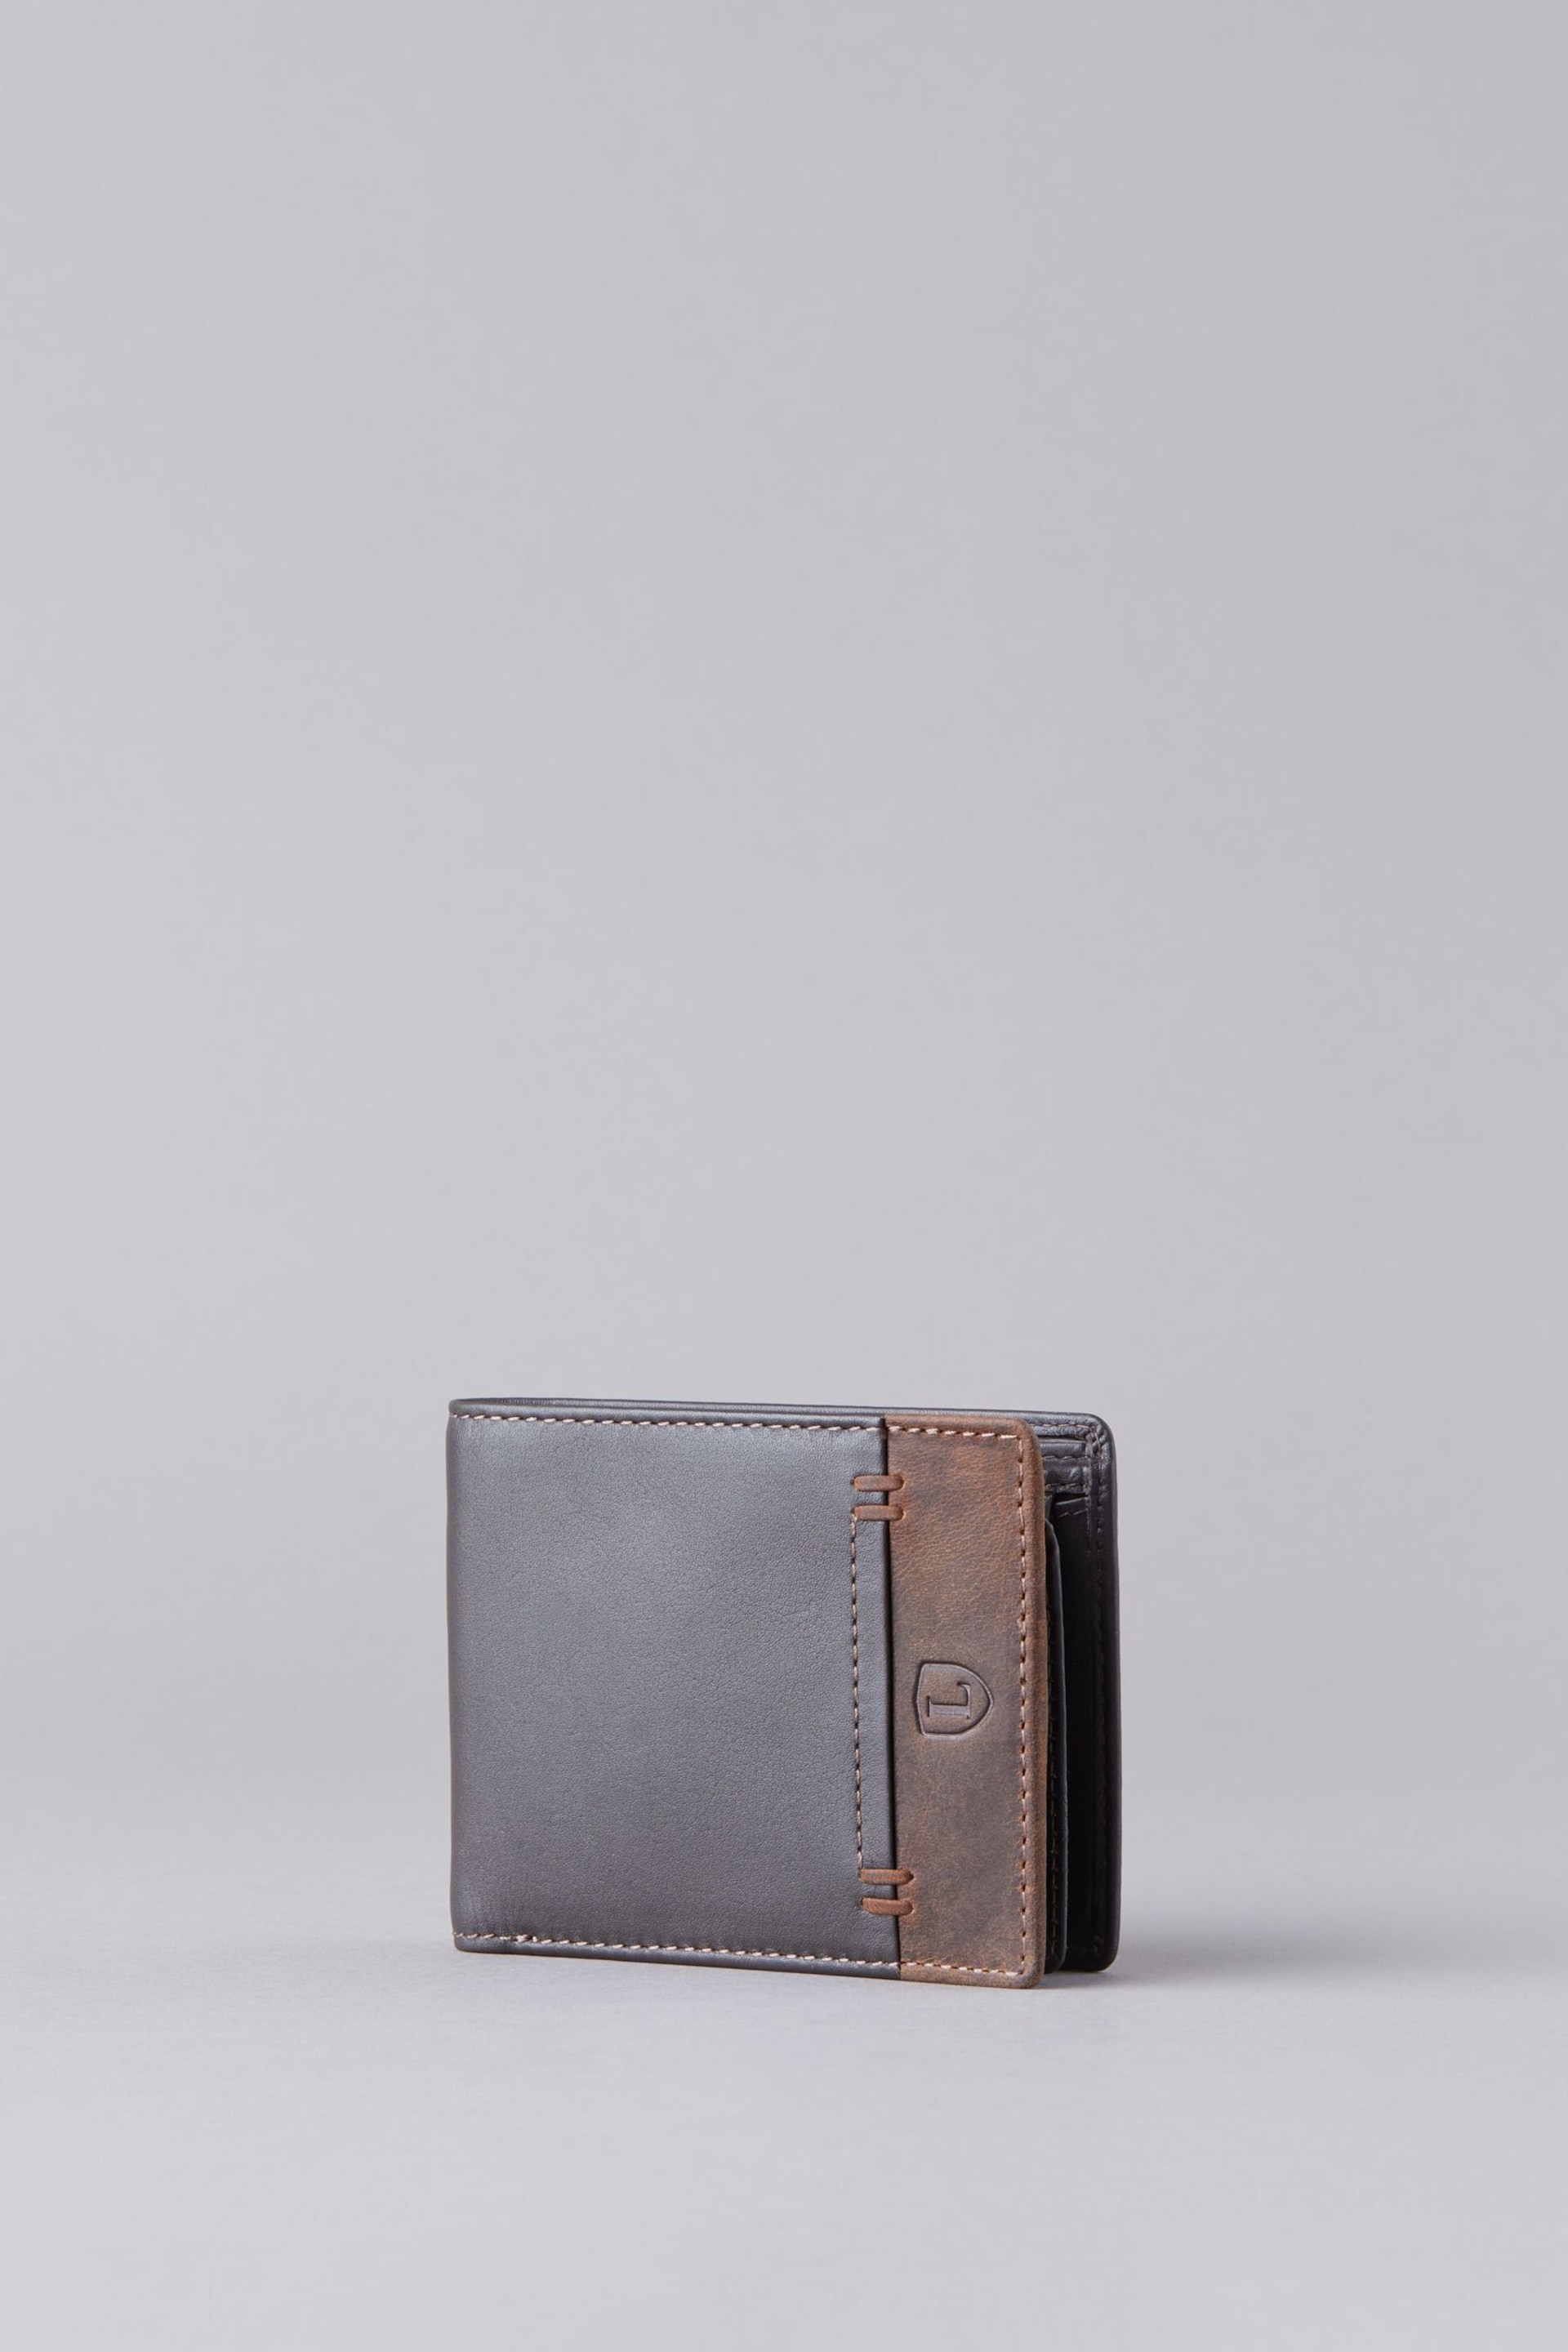 Lakeland Leather Brown Stitch Leather Bi-Fold Wallet - Image 1 of 7